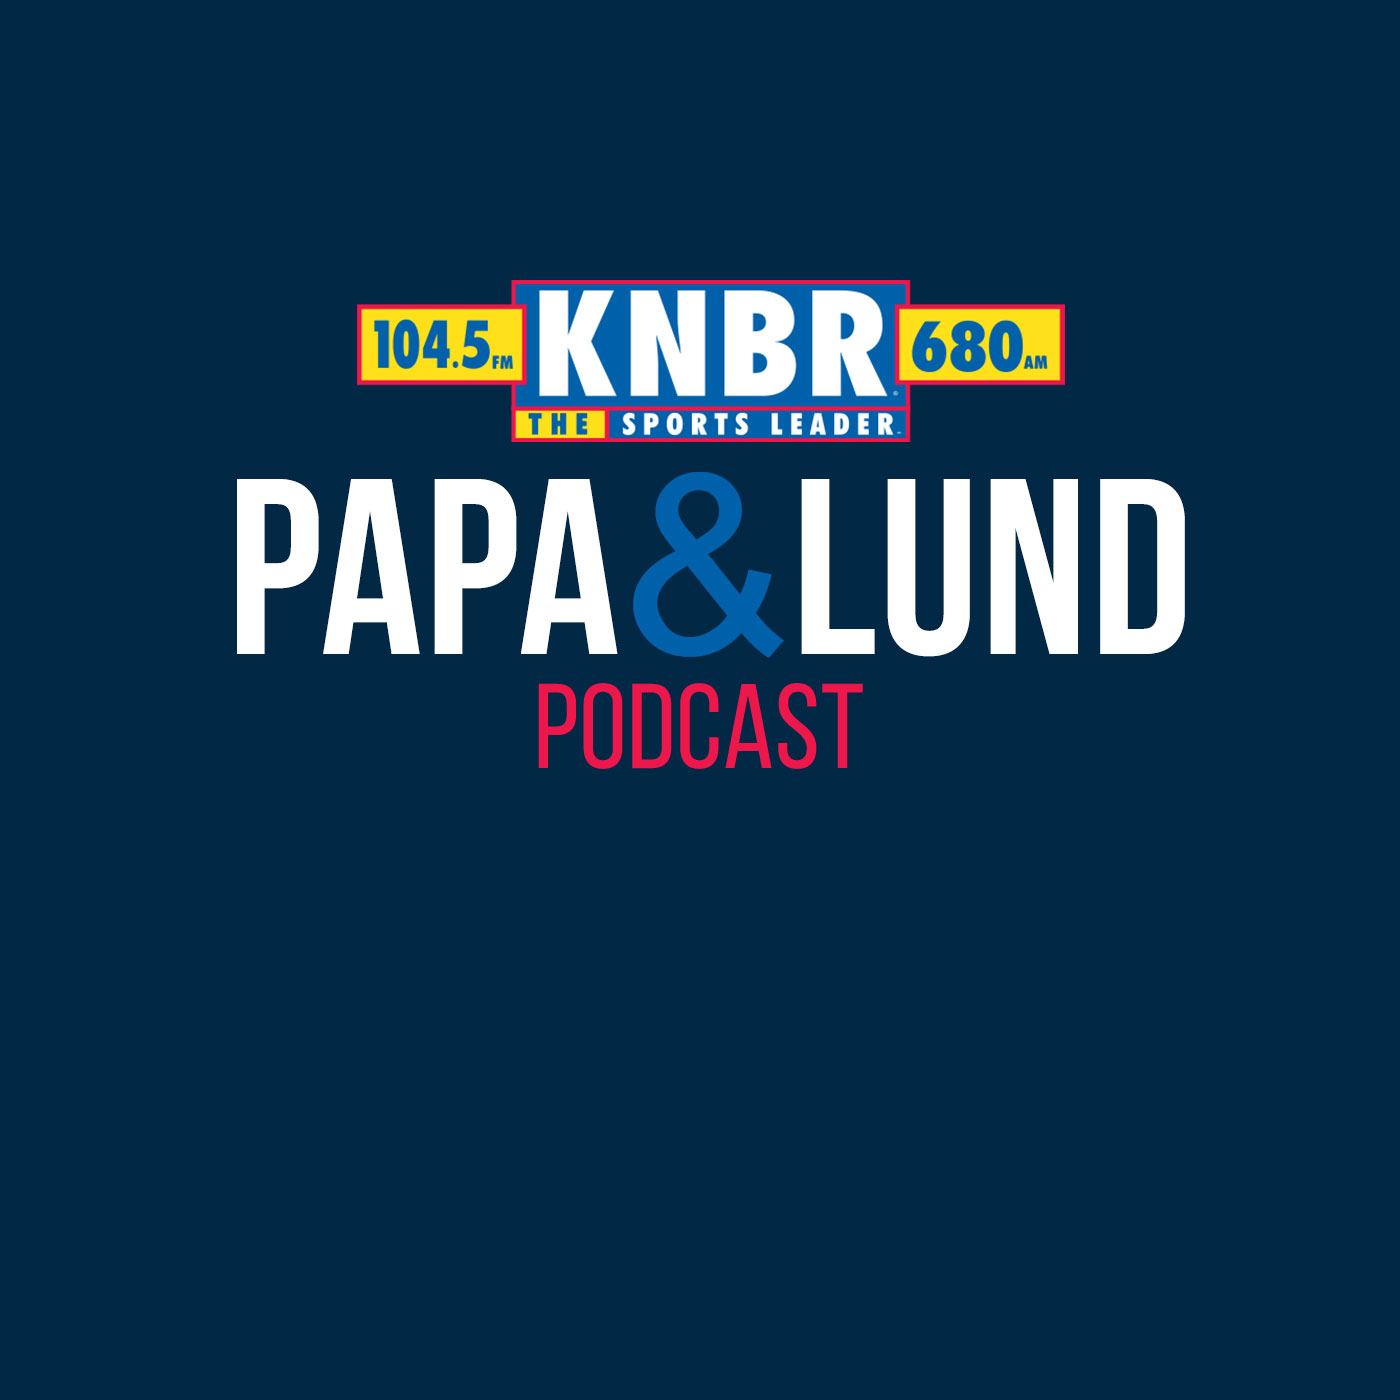 3-1 Sam Amick joins Papa & Lund to discuss the Warriors returning to form and how Klay Thompson is embracing his new bench role